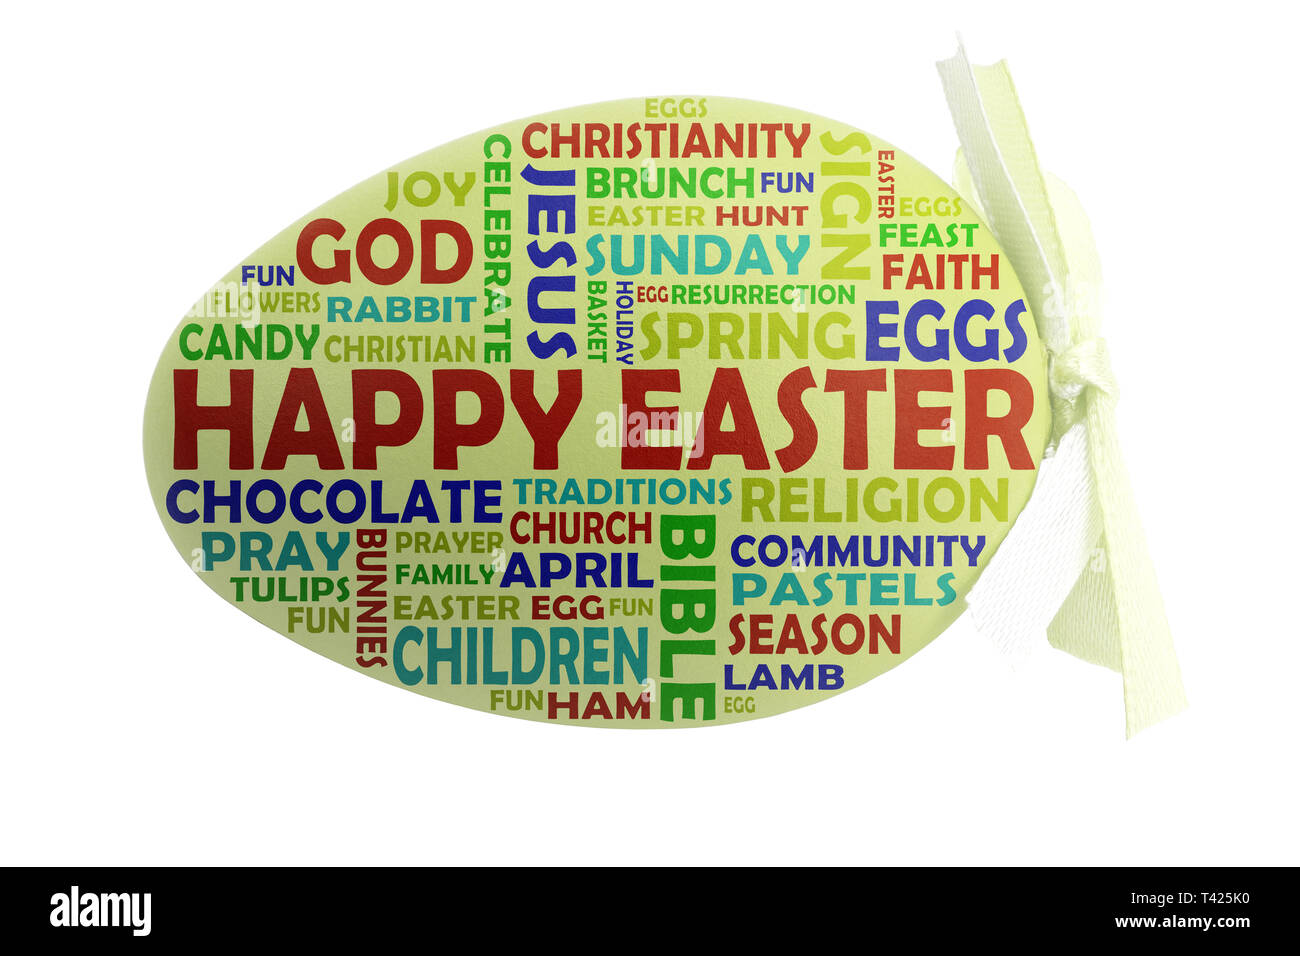 Happy Easter tag cloud with colored and transparent words from the christian holiday Easter. Stock Photo